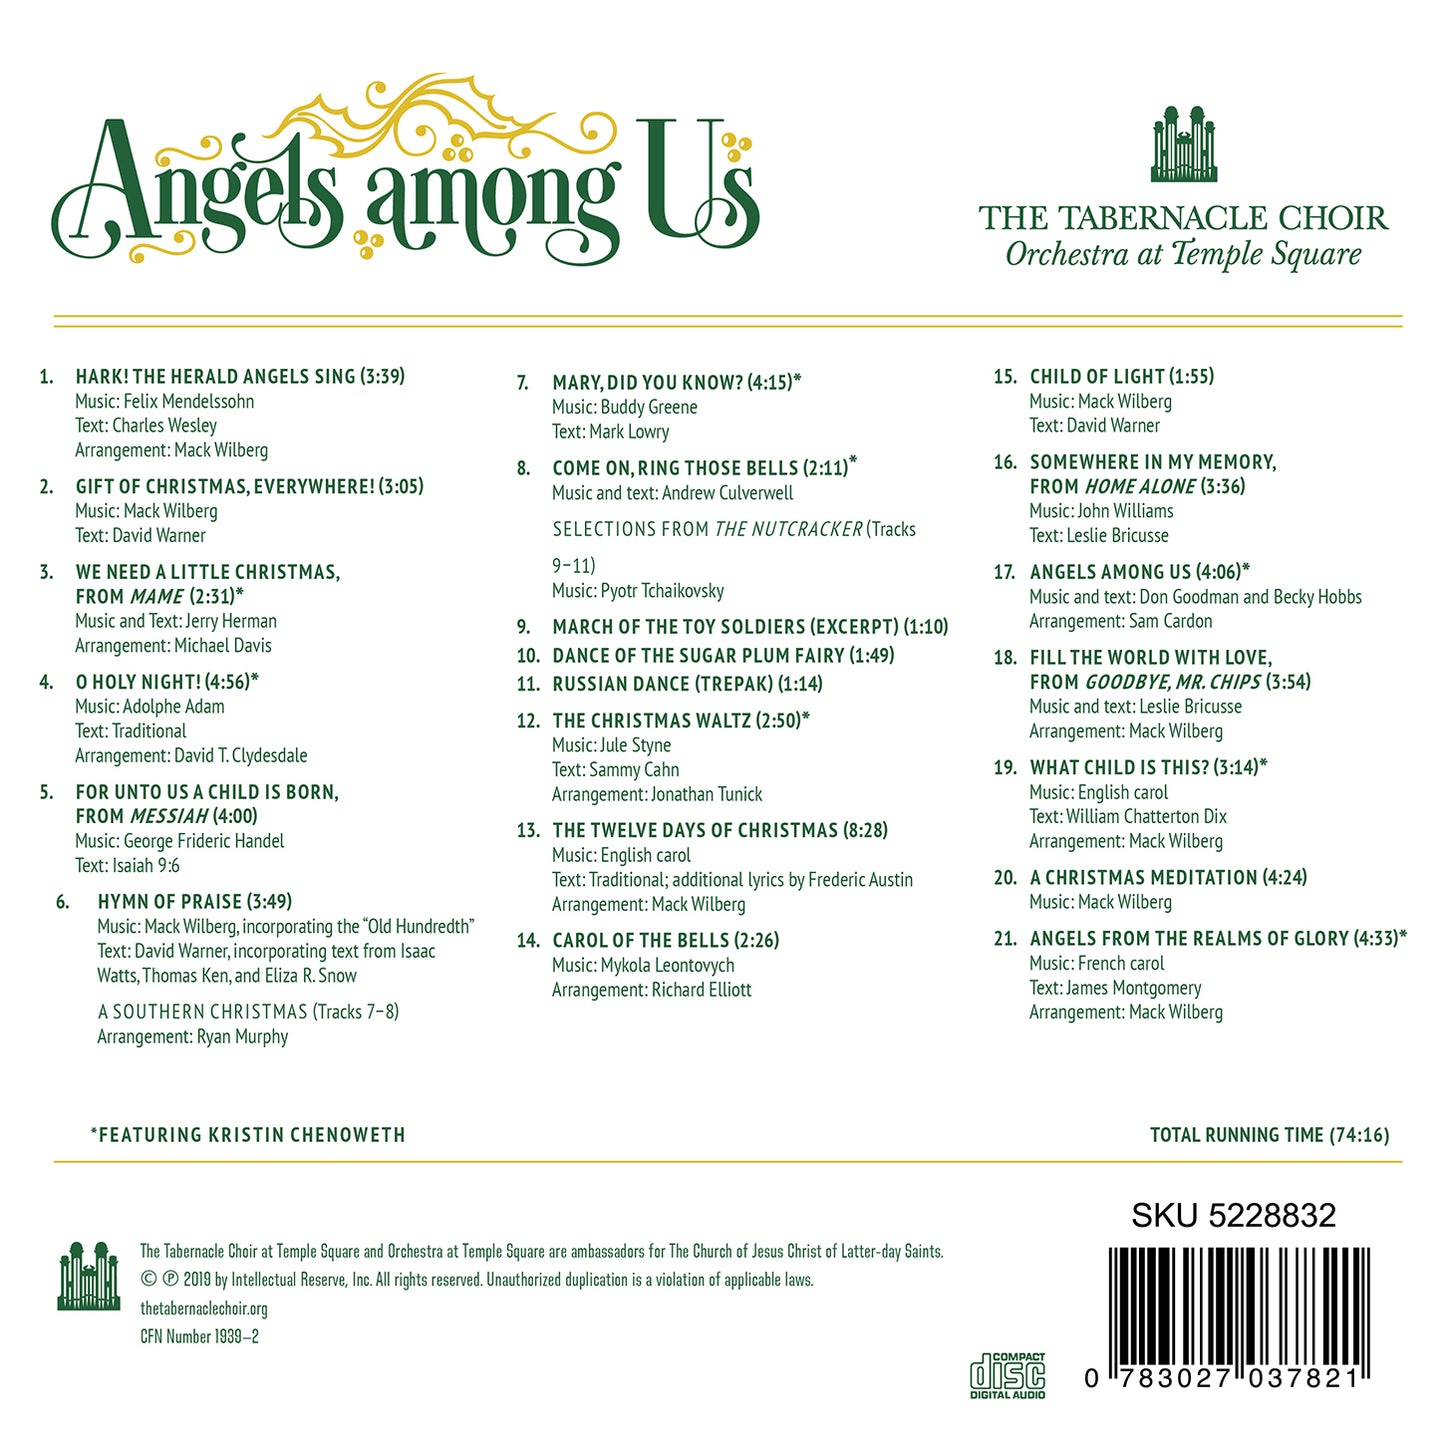 Angels Among Us / Tabernacle Choir at Temple Square [CD]